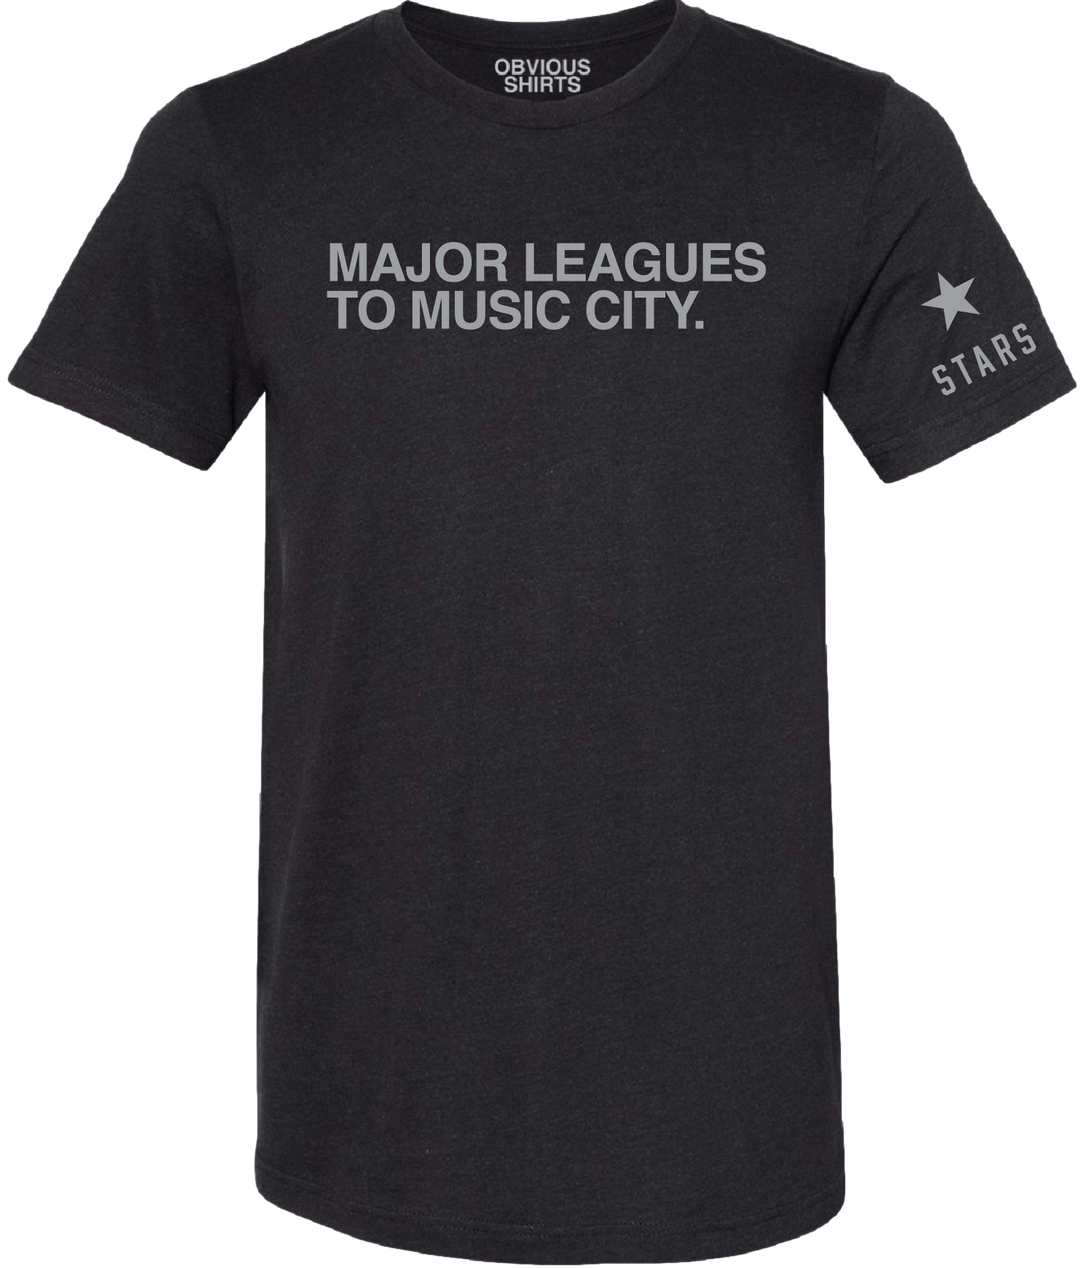 MAJOR LEAGUES TO MUSIC CITY. (BLACK) - OBVIOUS SHIRTS